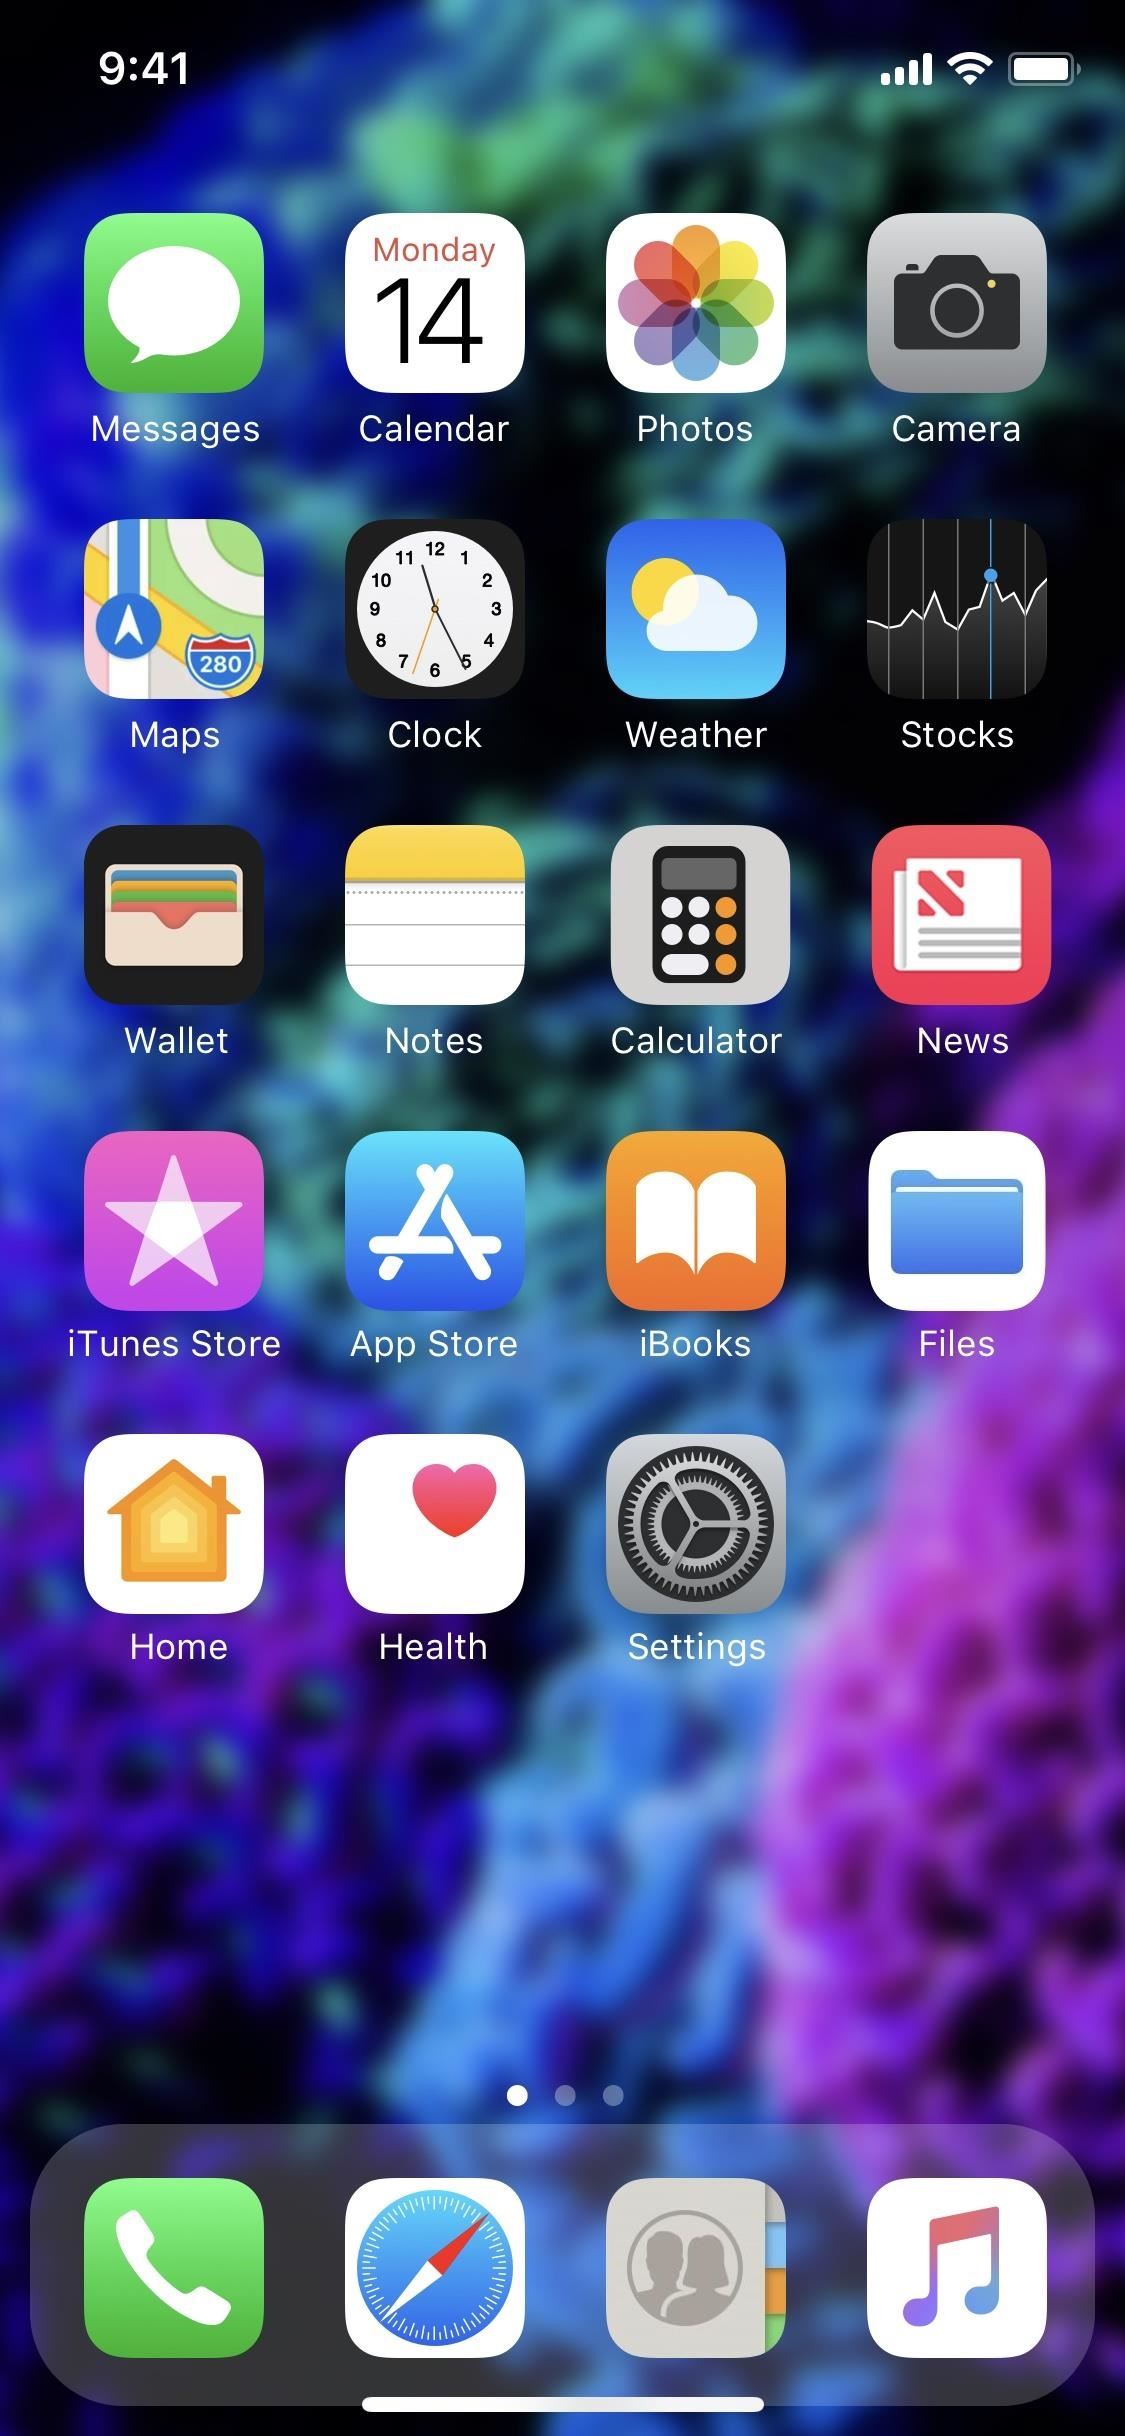 Top 5 Free Wallpaper Apps for Your iPhone